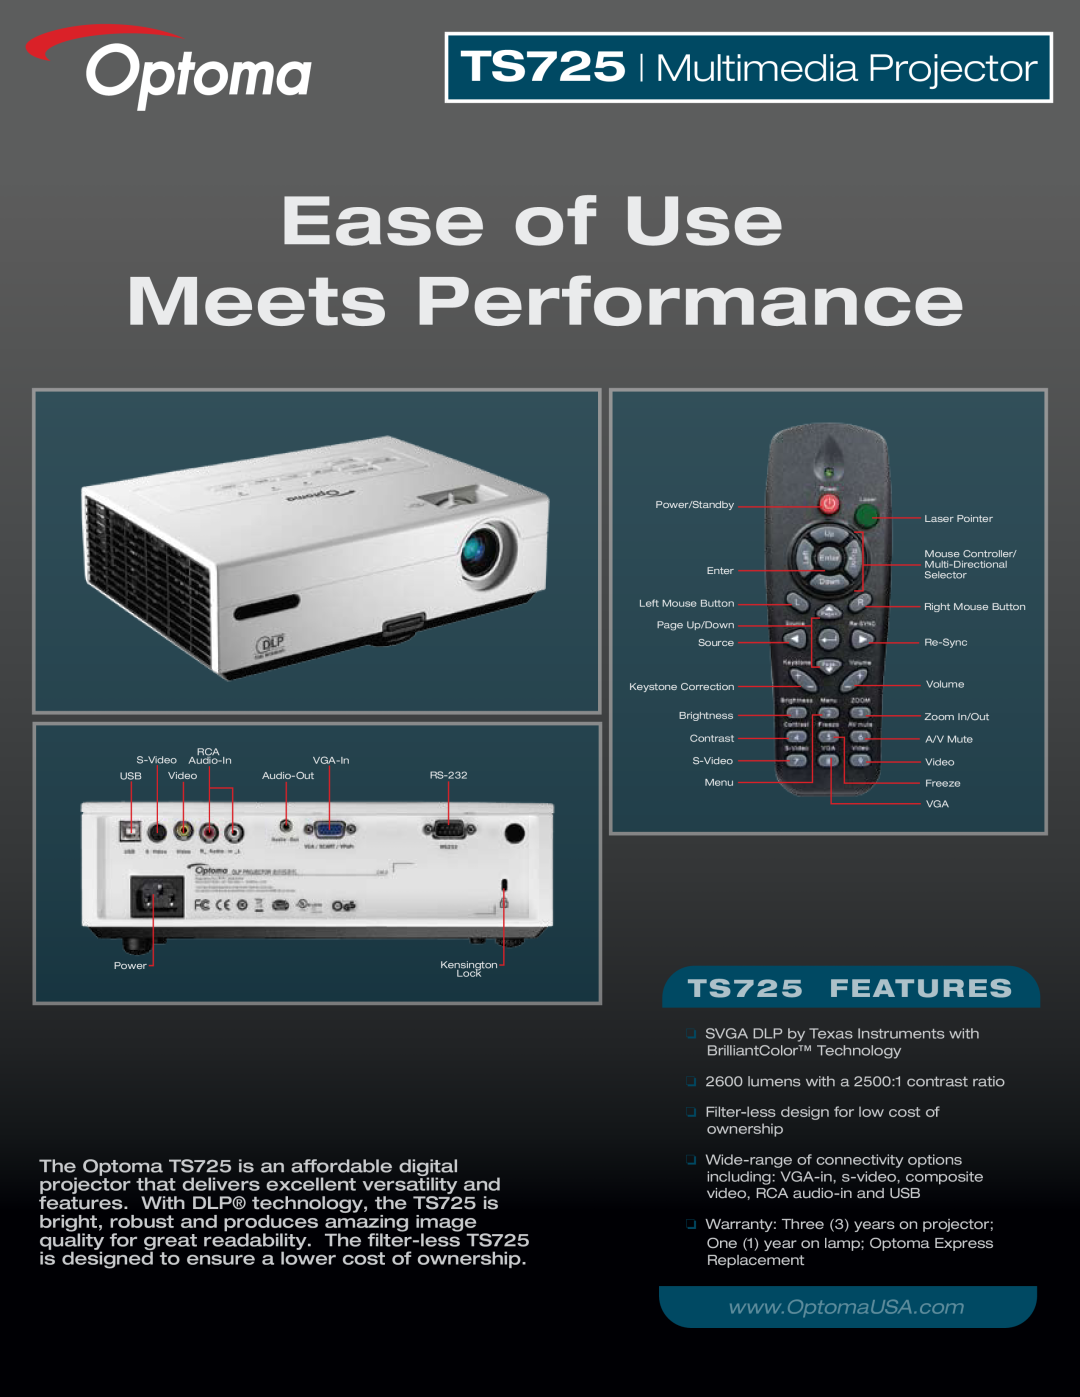 Optoma Technology warranty TS725 Multimedia Projector, Ease of Use Meets Performance, TS725 FEATURES 